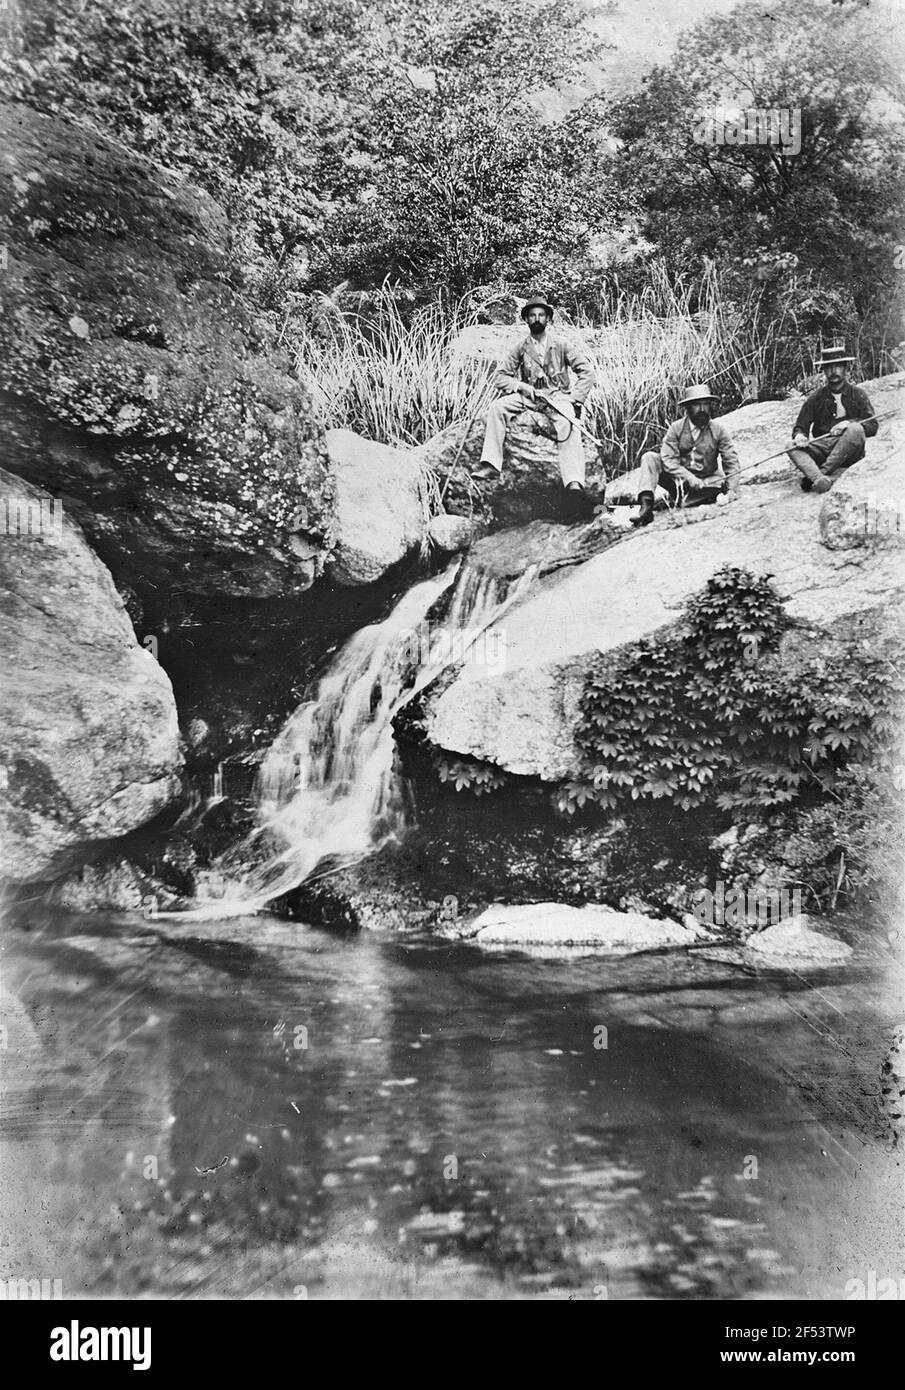 Expedition Manager Bruno Bone Hauer with his brother-in-law Richard Zimmermann (left) and probably Carl Wolter sitting on boulders above a small waterfall, while a hike in the valley of Sang-Wöh-on near the Buddhist monastery Mio-Han-San (north-northeast of Kaechon and near Wol-Lihm) Stock Photo